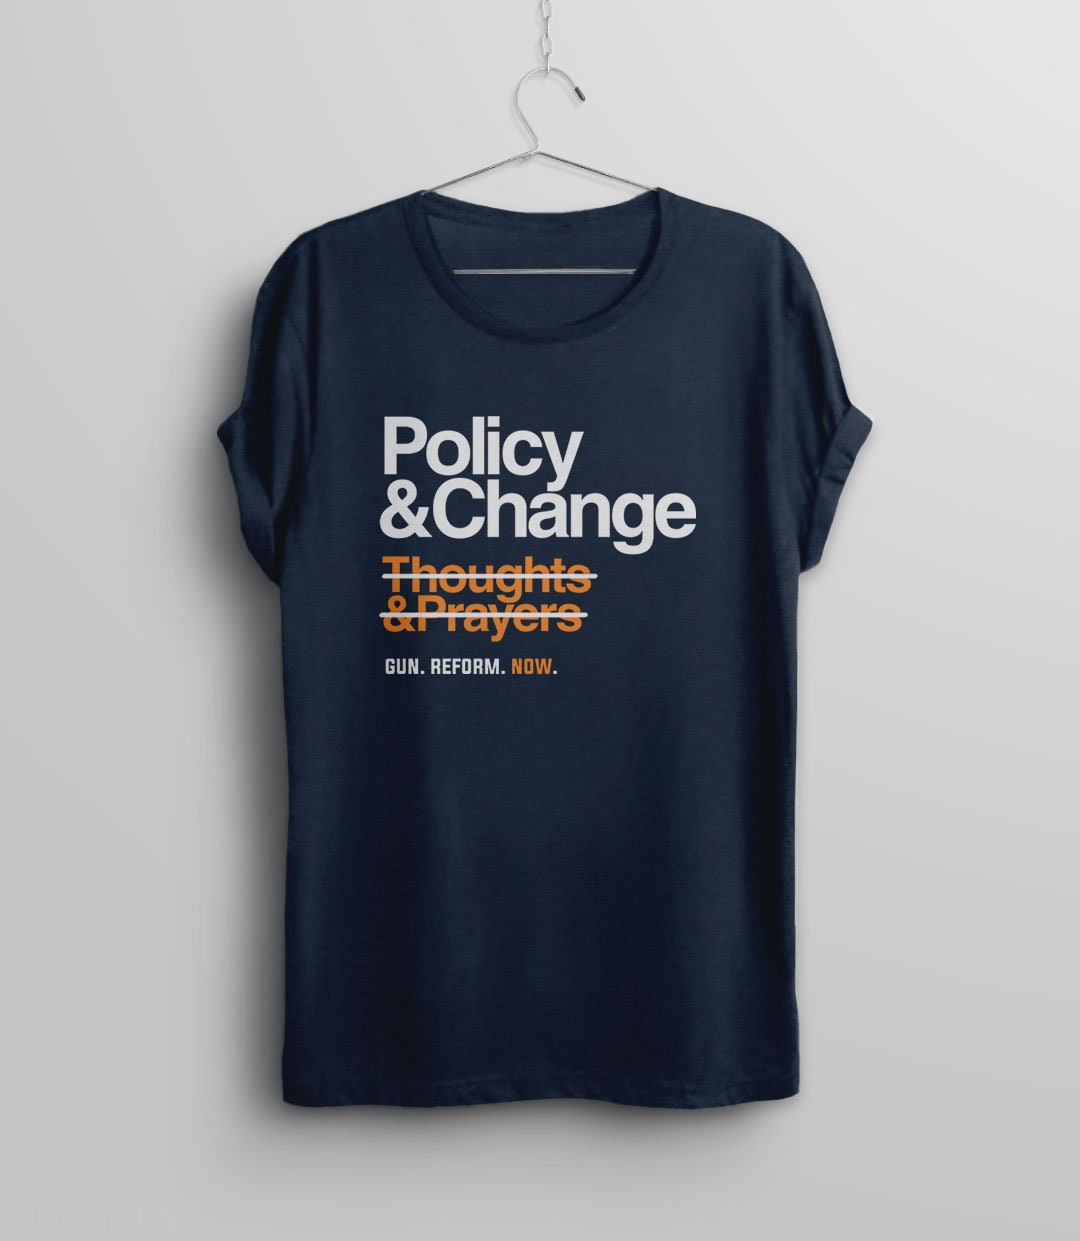 Policy and Change Shirt, Black Unisex XS by BootsTees